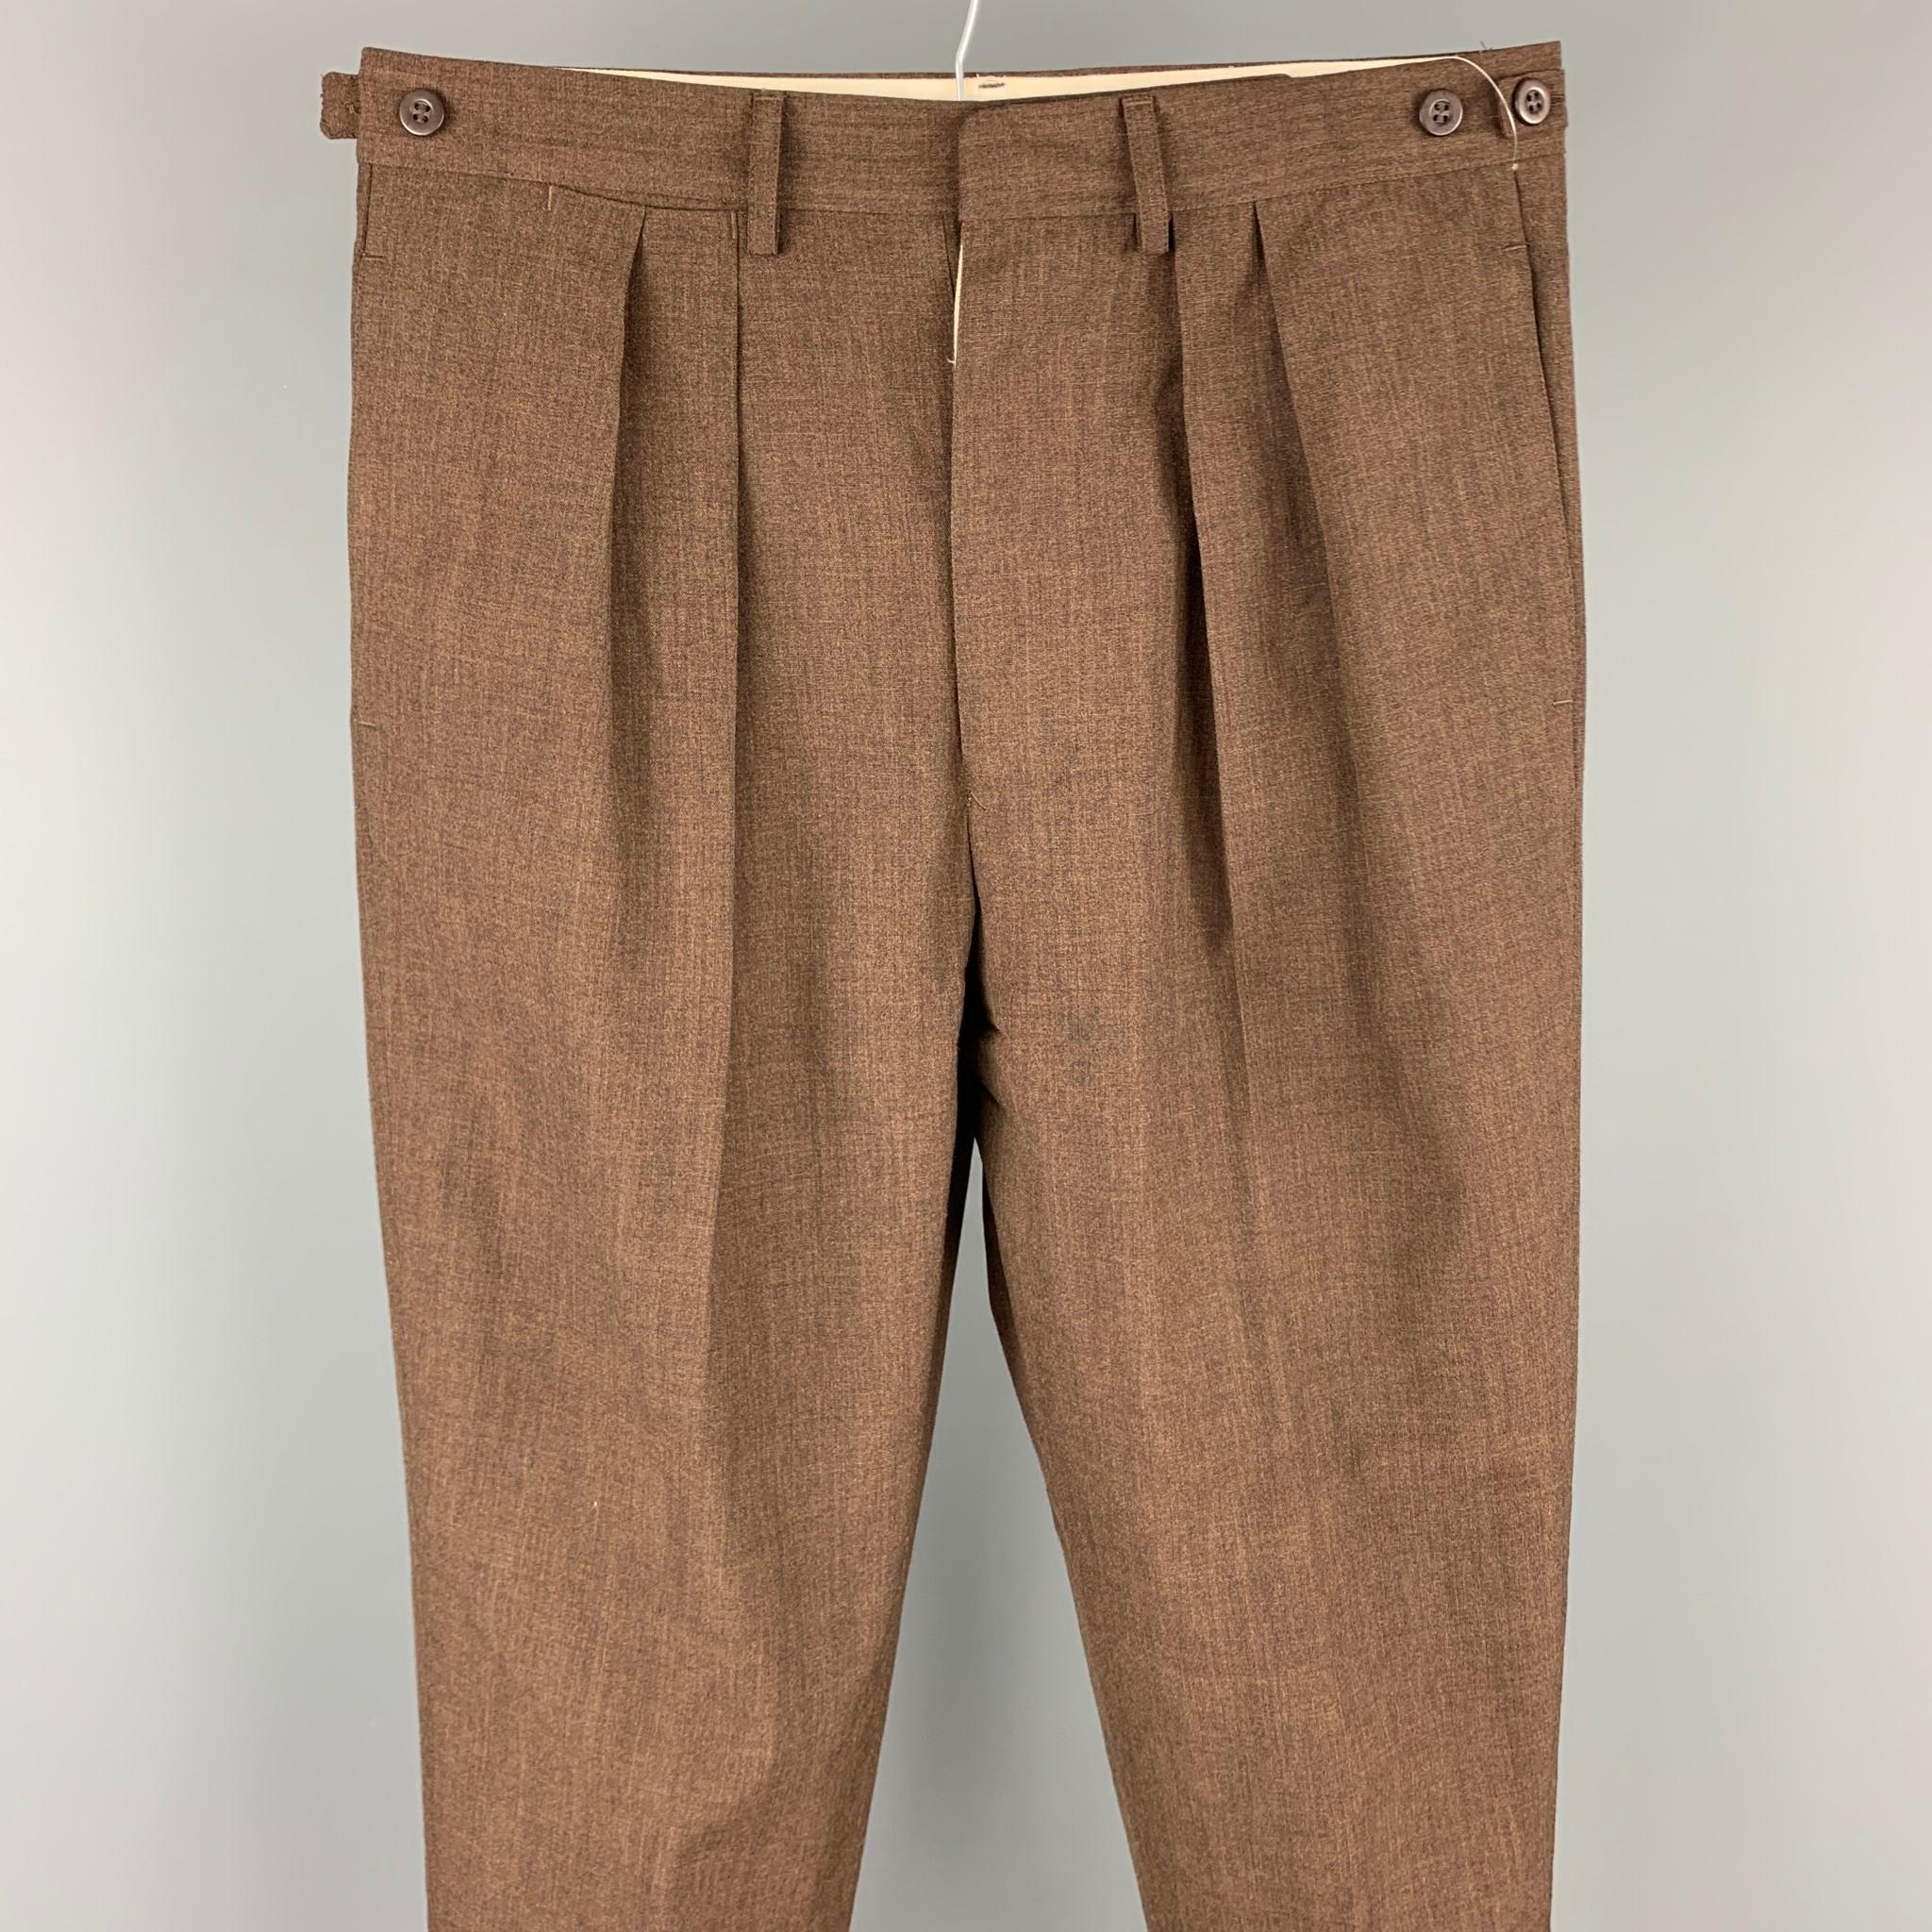 Vintage JEAN PAUL GAULTIER dress pants comes in a brow wool blend featuring a pleated style, side tabs, front tab, and a button fly closure. Made in Italy.

Good Pre-Owned Condition.
Marked: IT 50

Measurements:

Waist: 32 in.
Rise: 13 in.
Inseam: